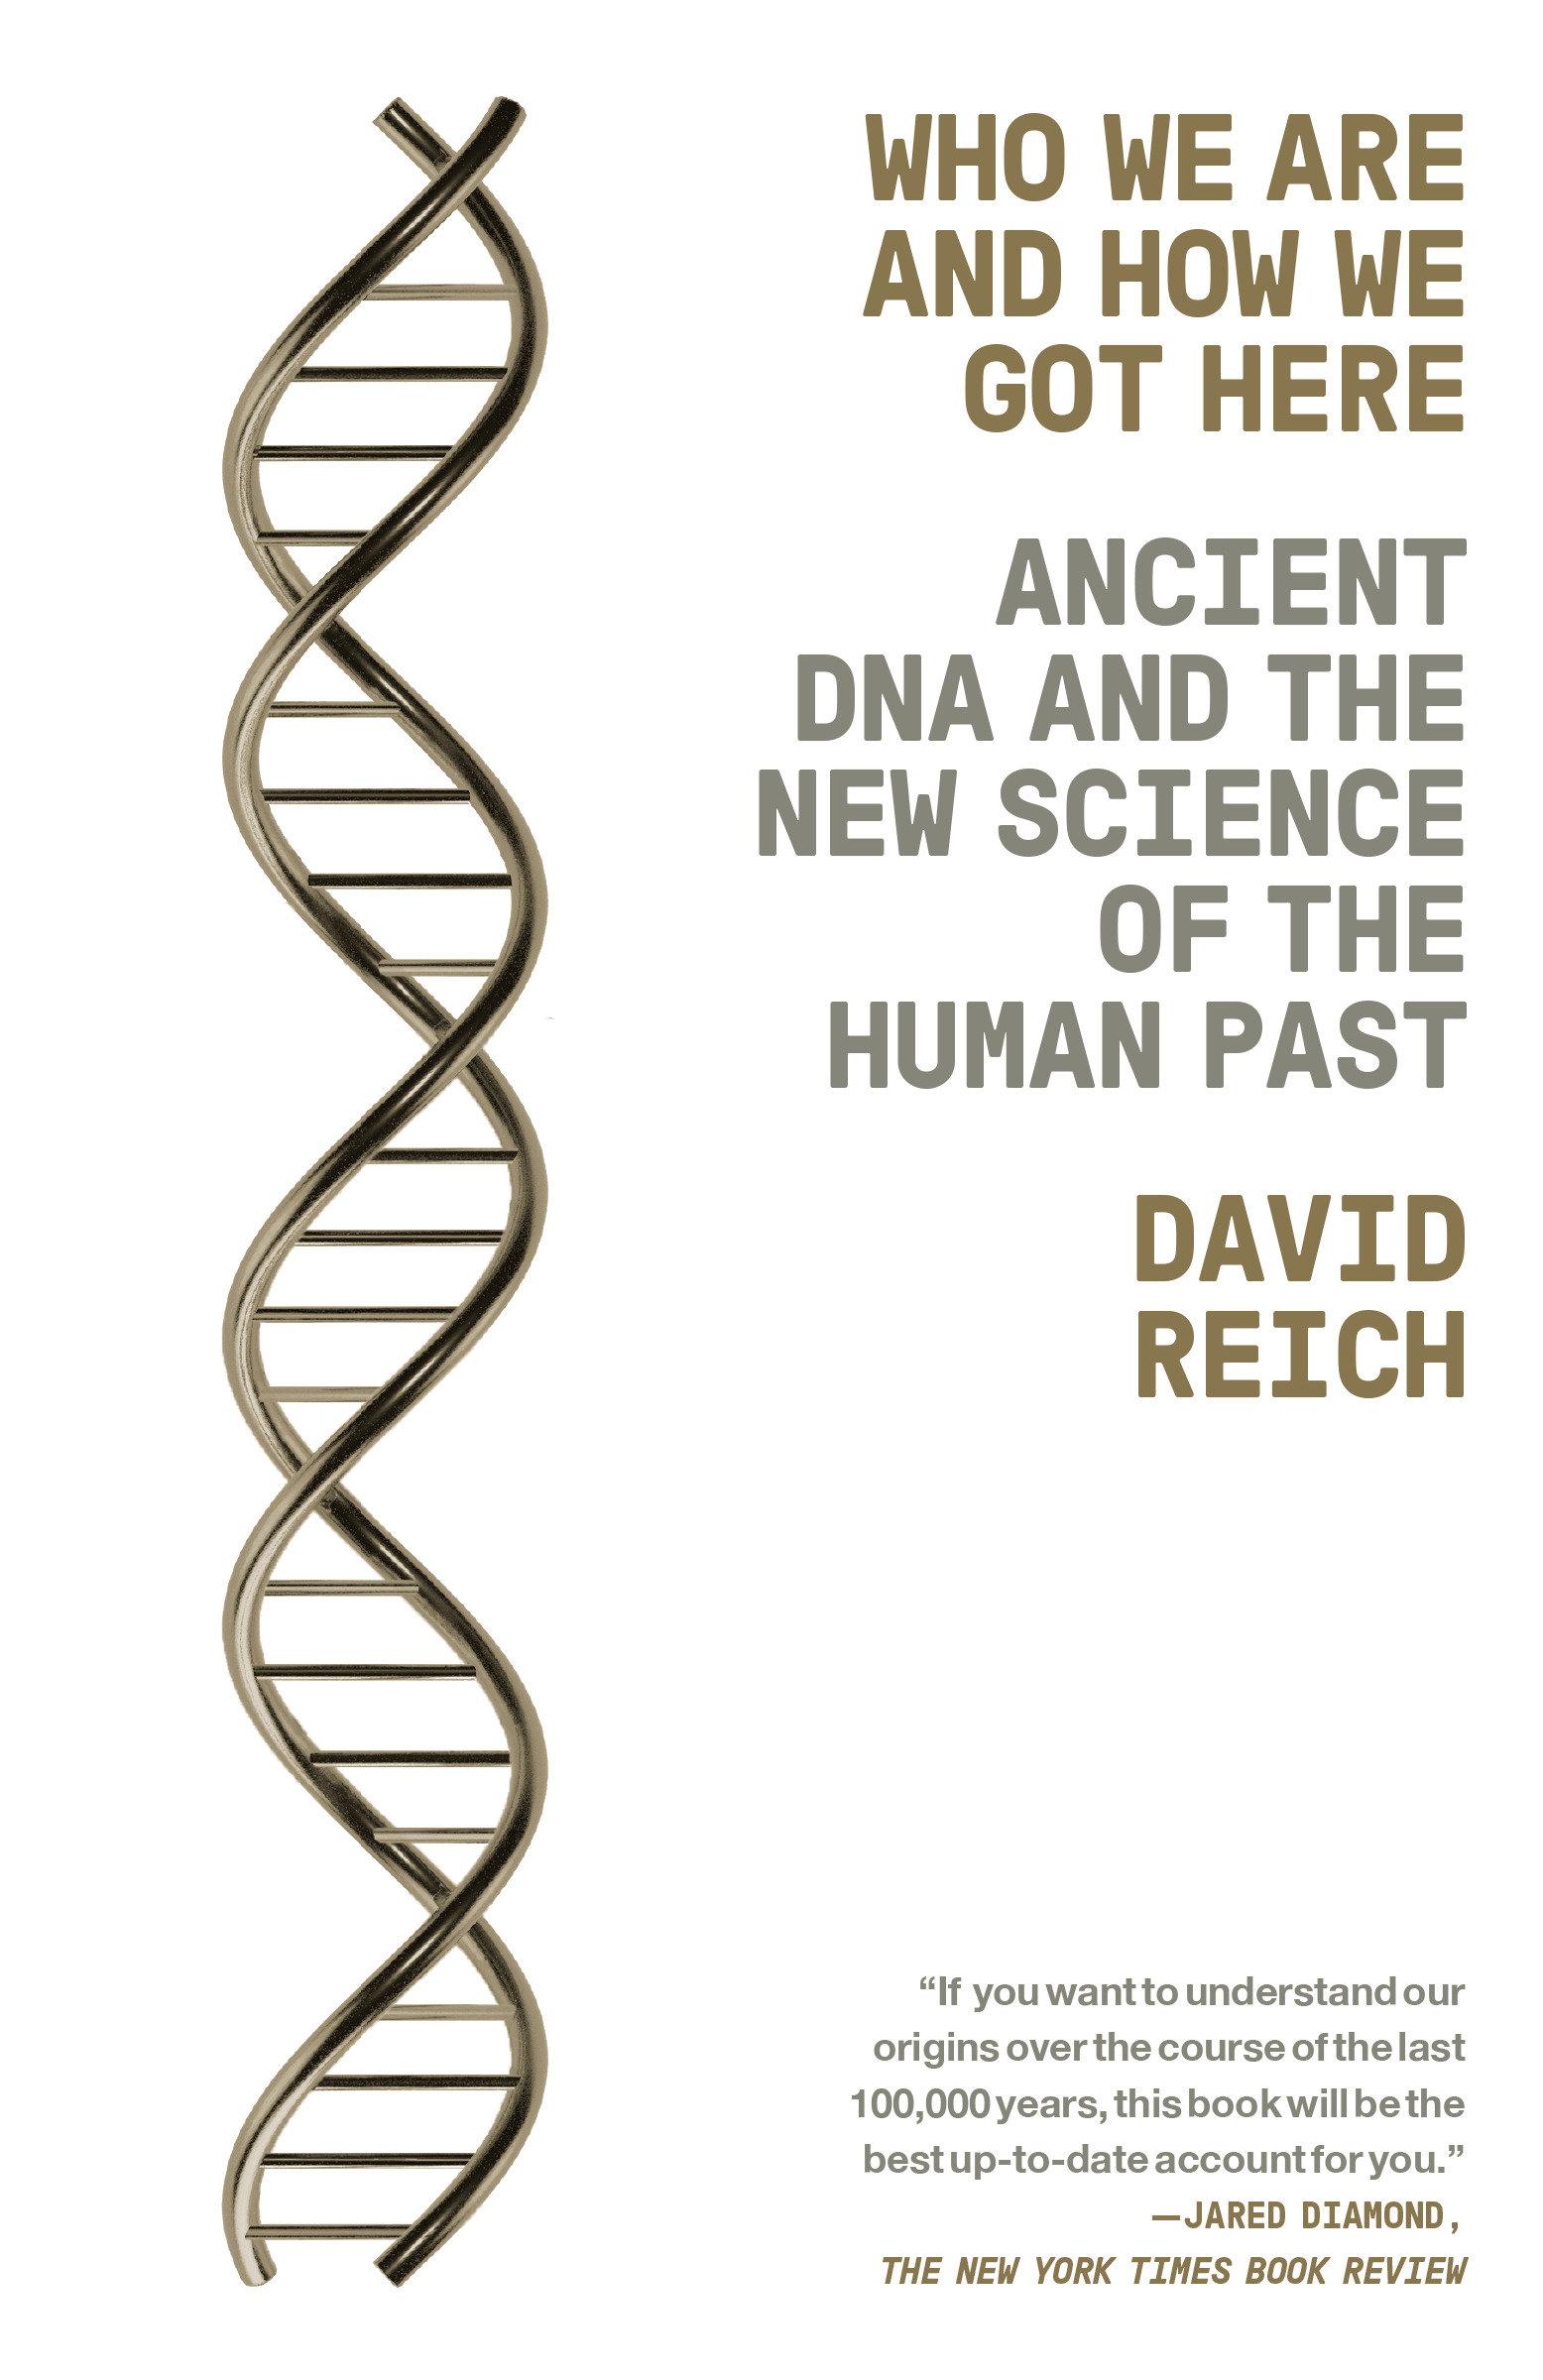 Who We Are and How We Got Here / Ancient DNA and the New Science of the Human Past / David Reich / Taschenbuch / 368 S. / Englisch / 2019 / Random House LLC US / EAN 9781101873465 - Reich, David